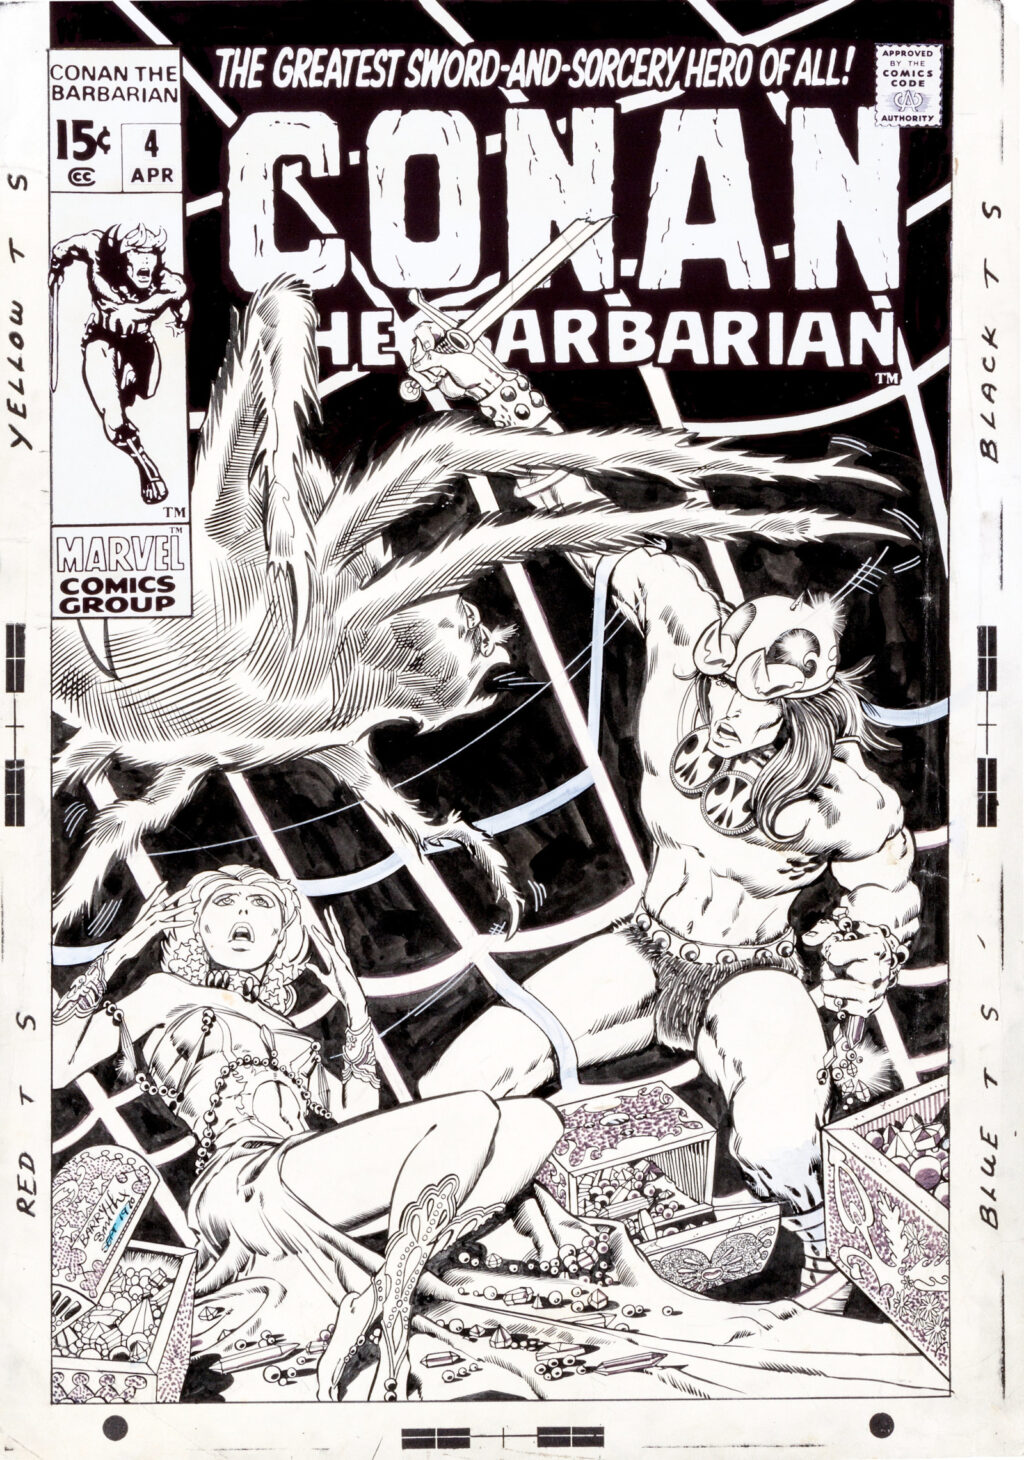 Conan the Barbarian issue 4 cover by Barry Smith